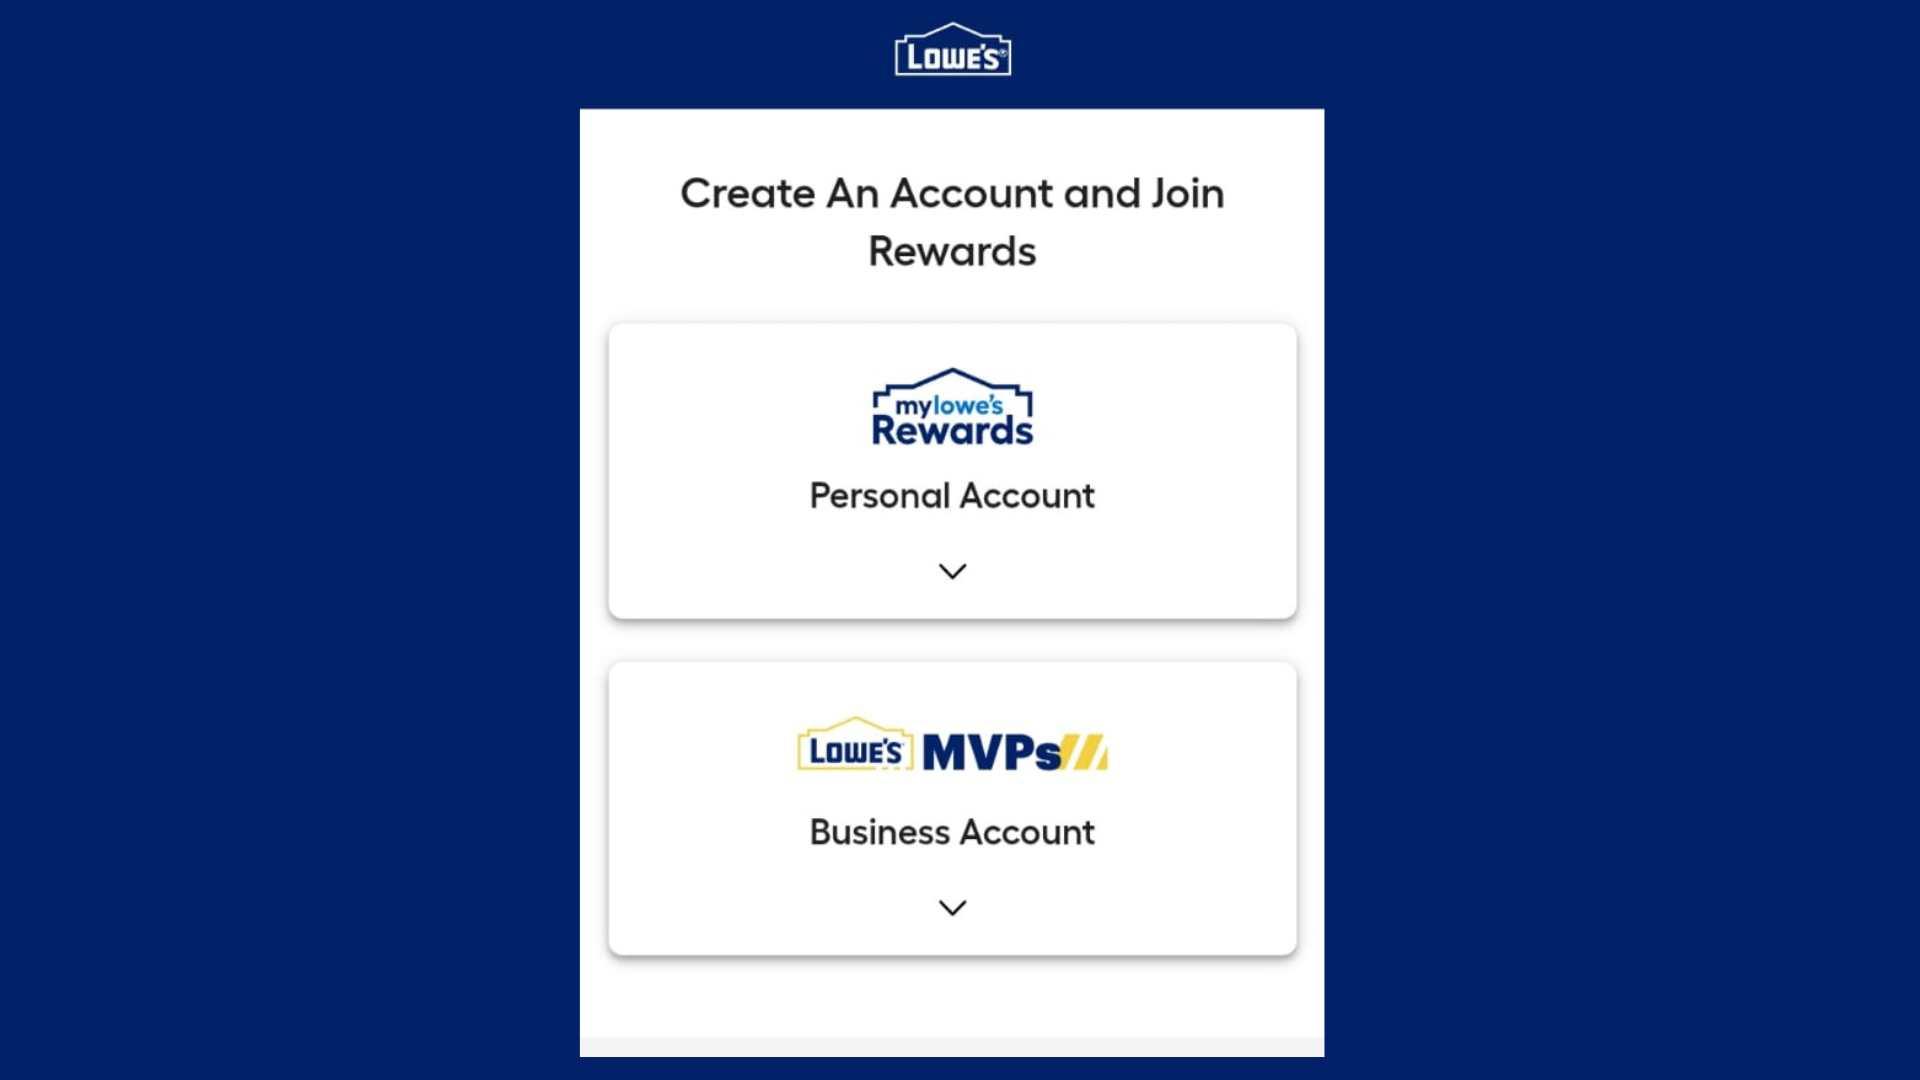 How to create an account on the Lowe's app?